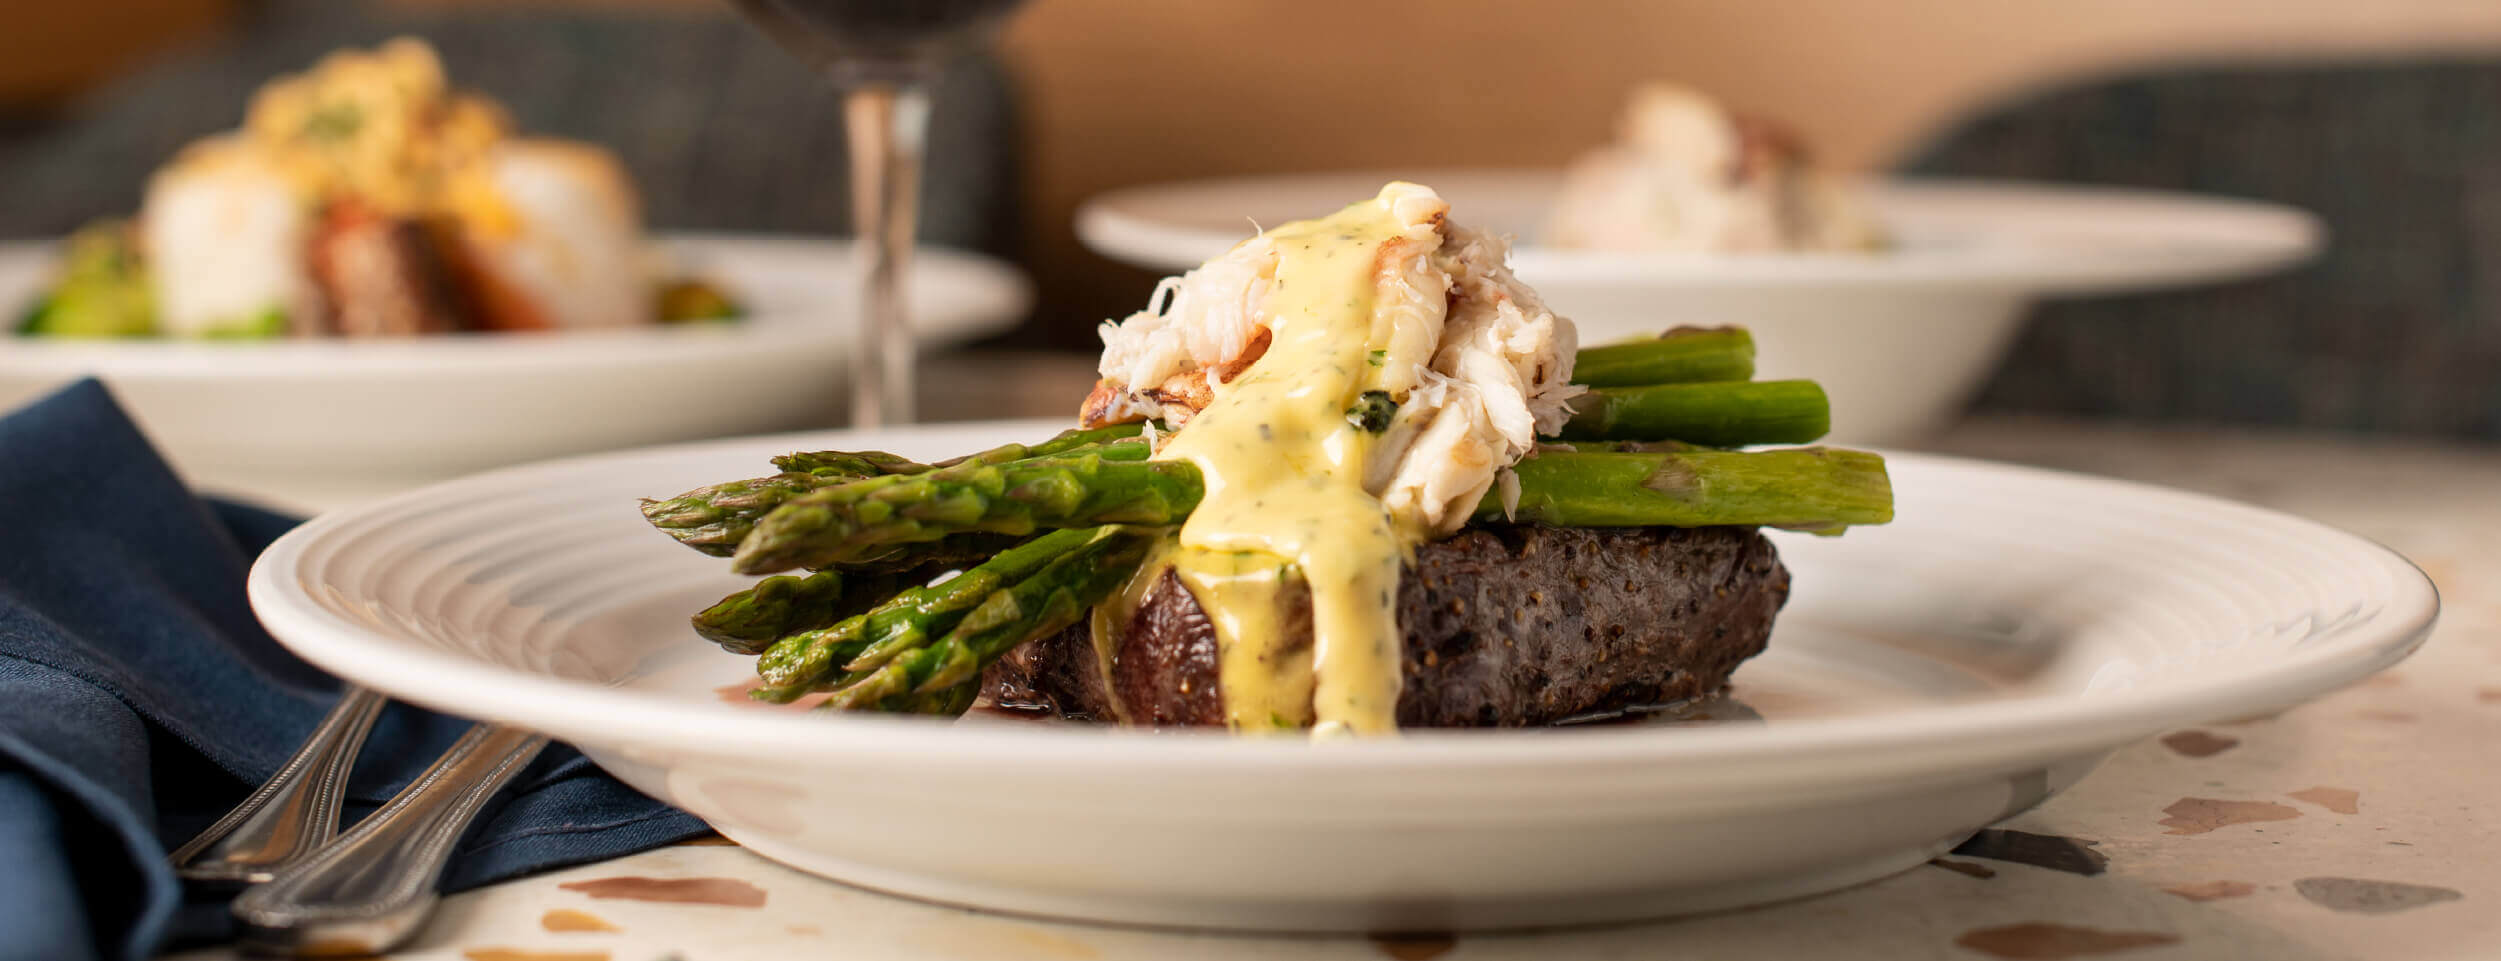 Georgie's steak "Oscar Style" (topped with Fresh Dungeness Crab, Béarnaise, Asparagus).